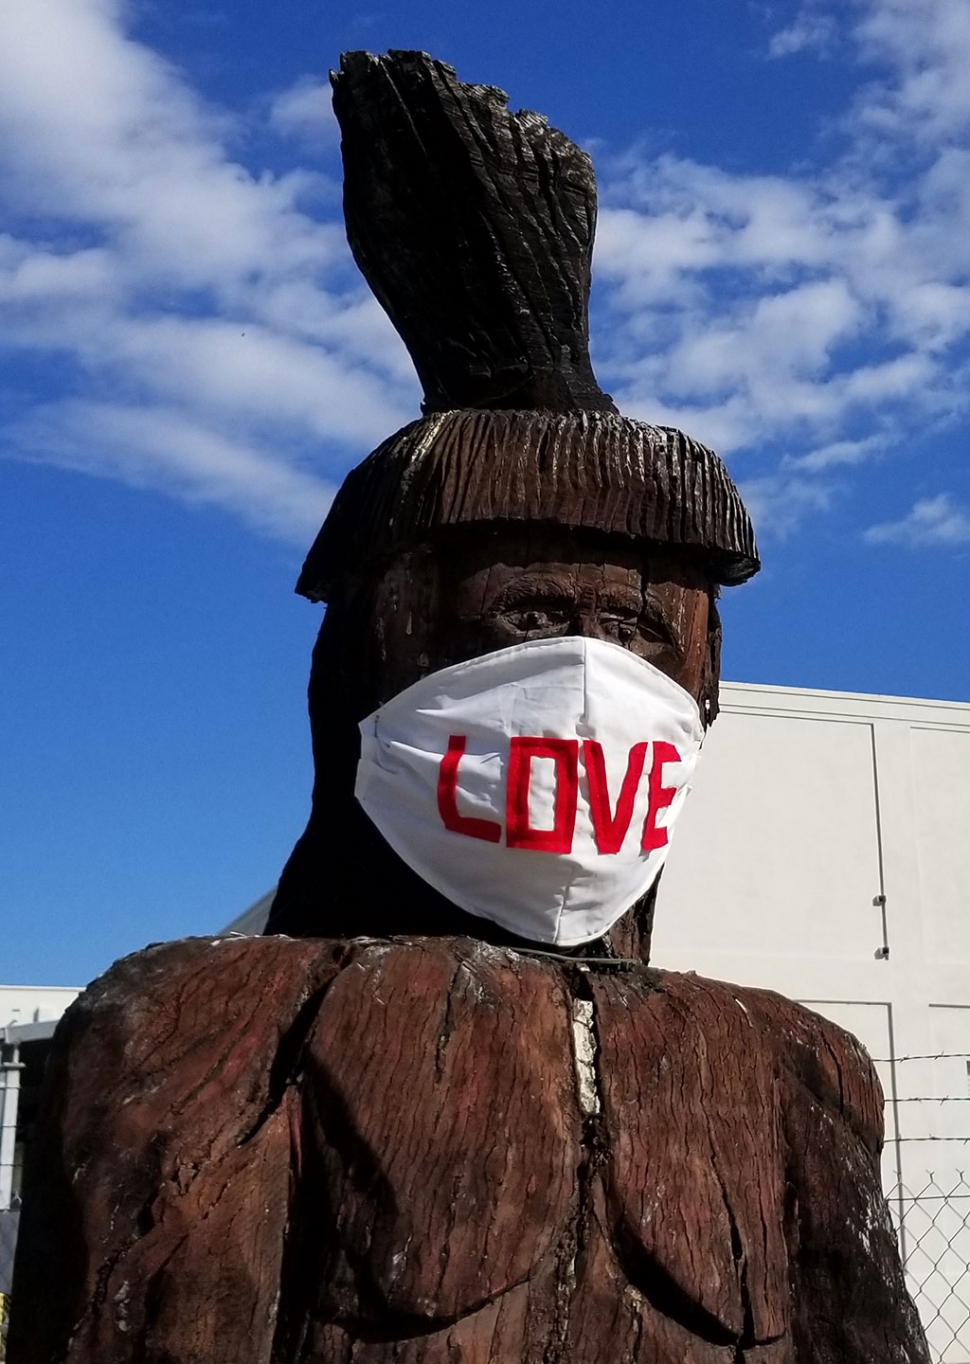 Even the Fillmore Indian is taking COVID-19 protection seriously. Be safe for yourself and the community.